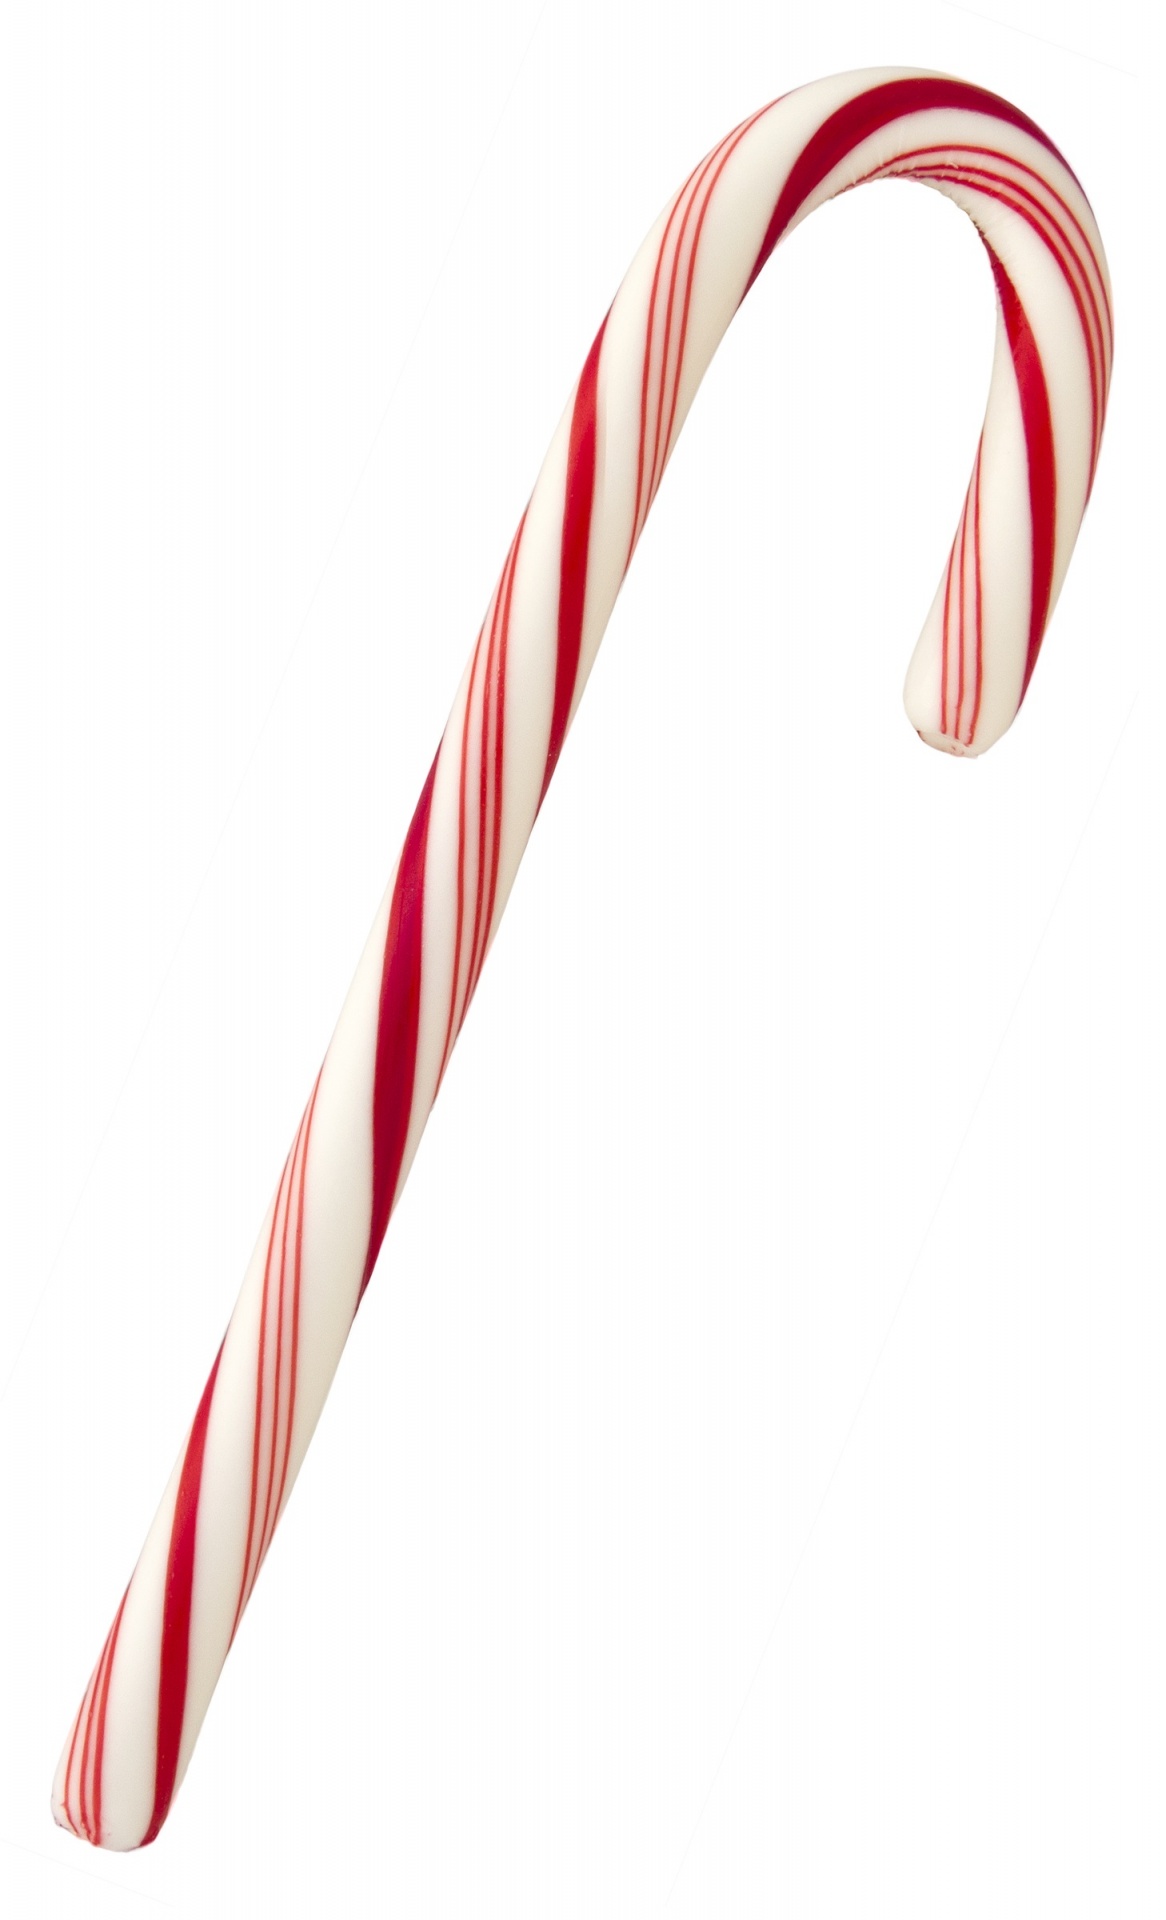 Candy Cane Free Stock Photo - Public Domain Pictures